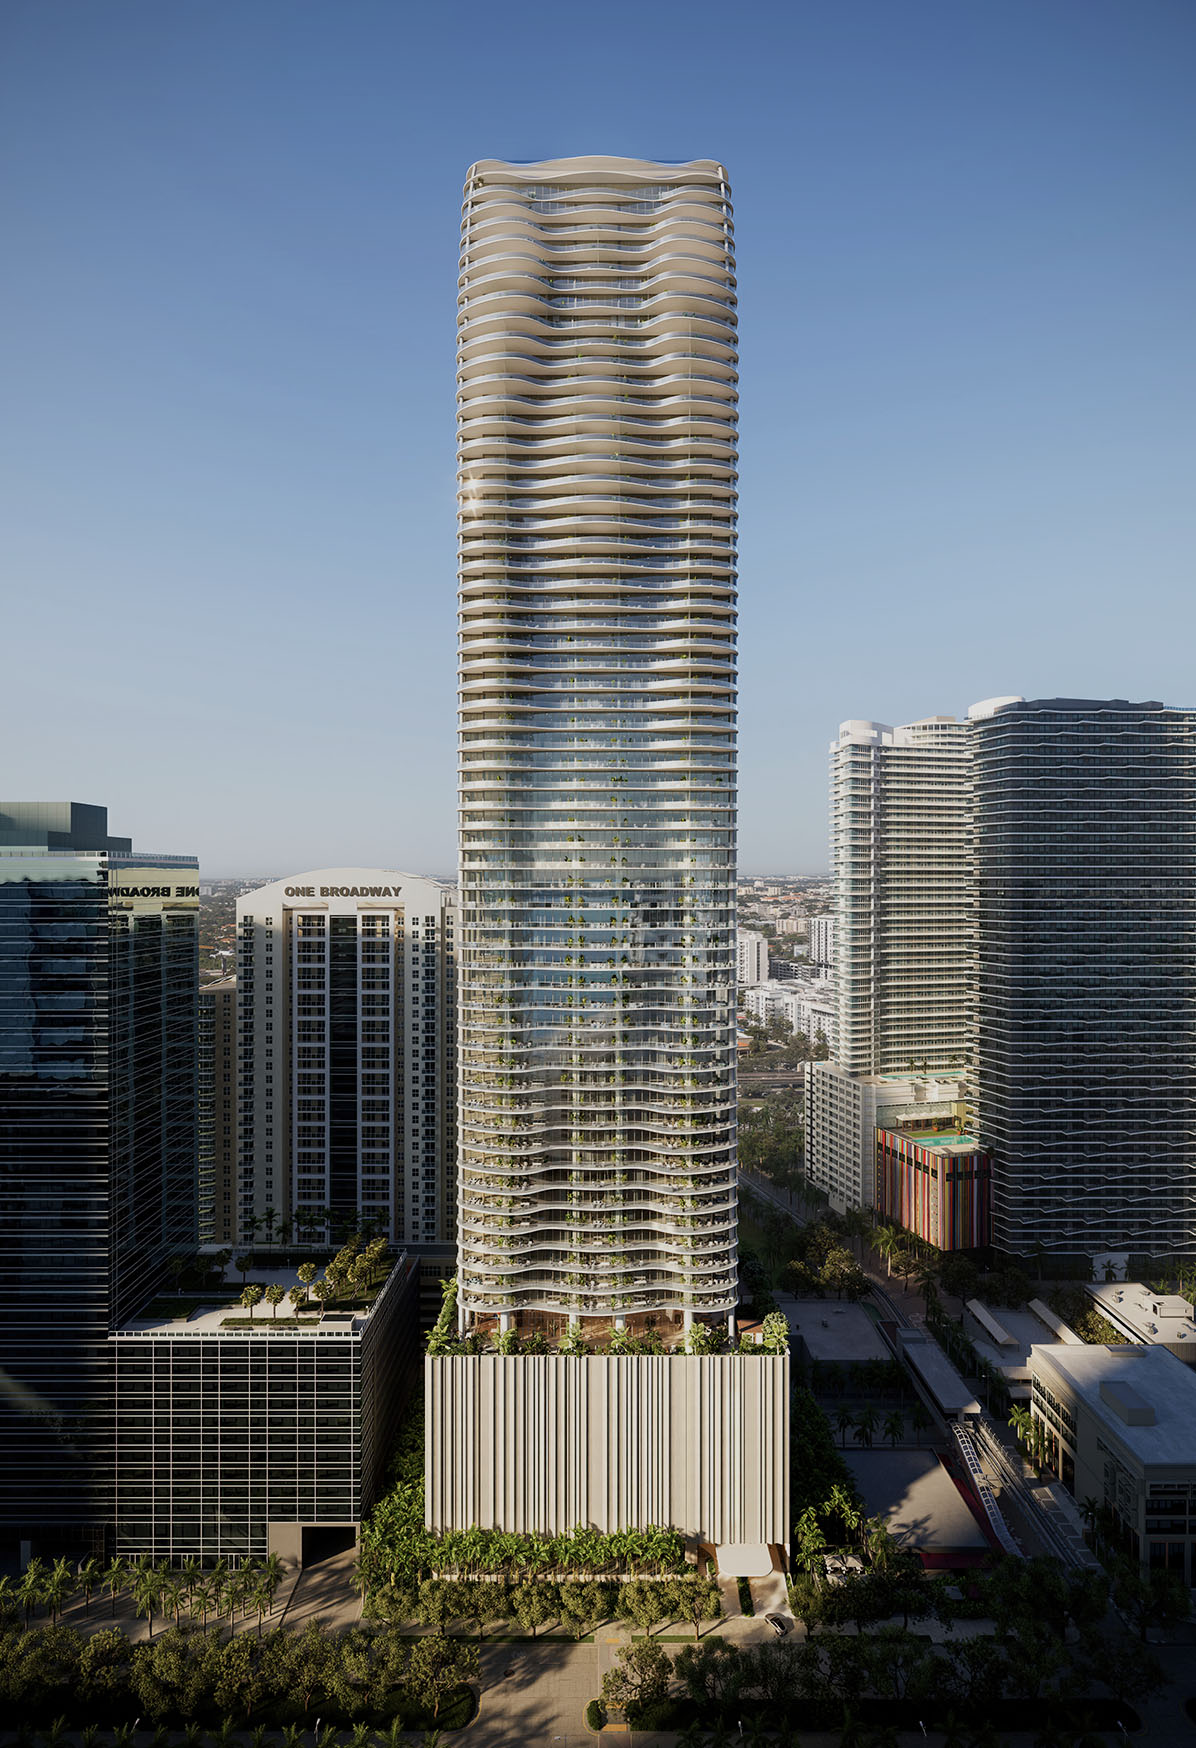 1428 Brickell: The Epitome of Luxury and Sustainability in Miami